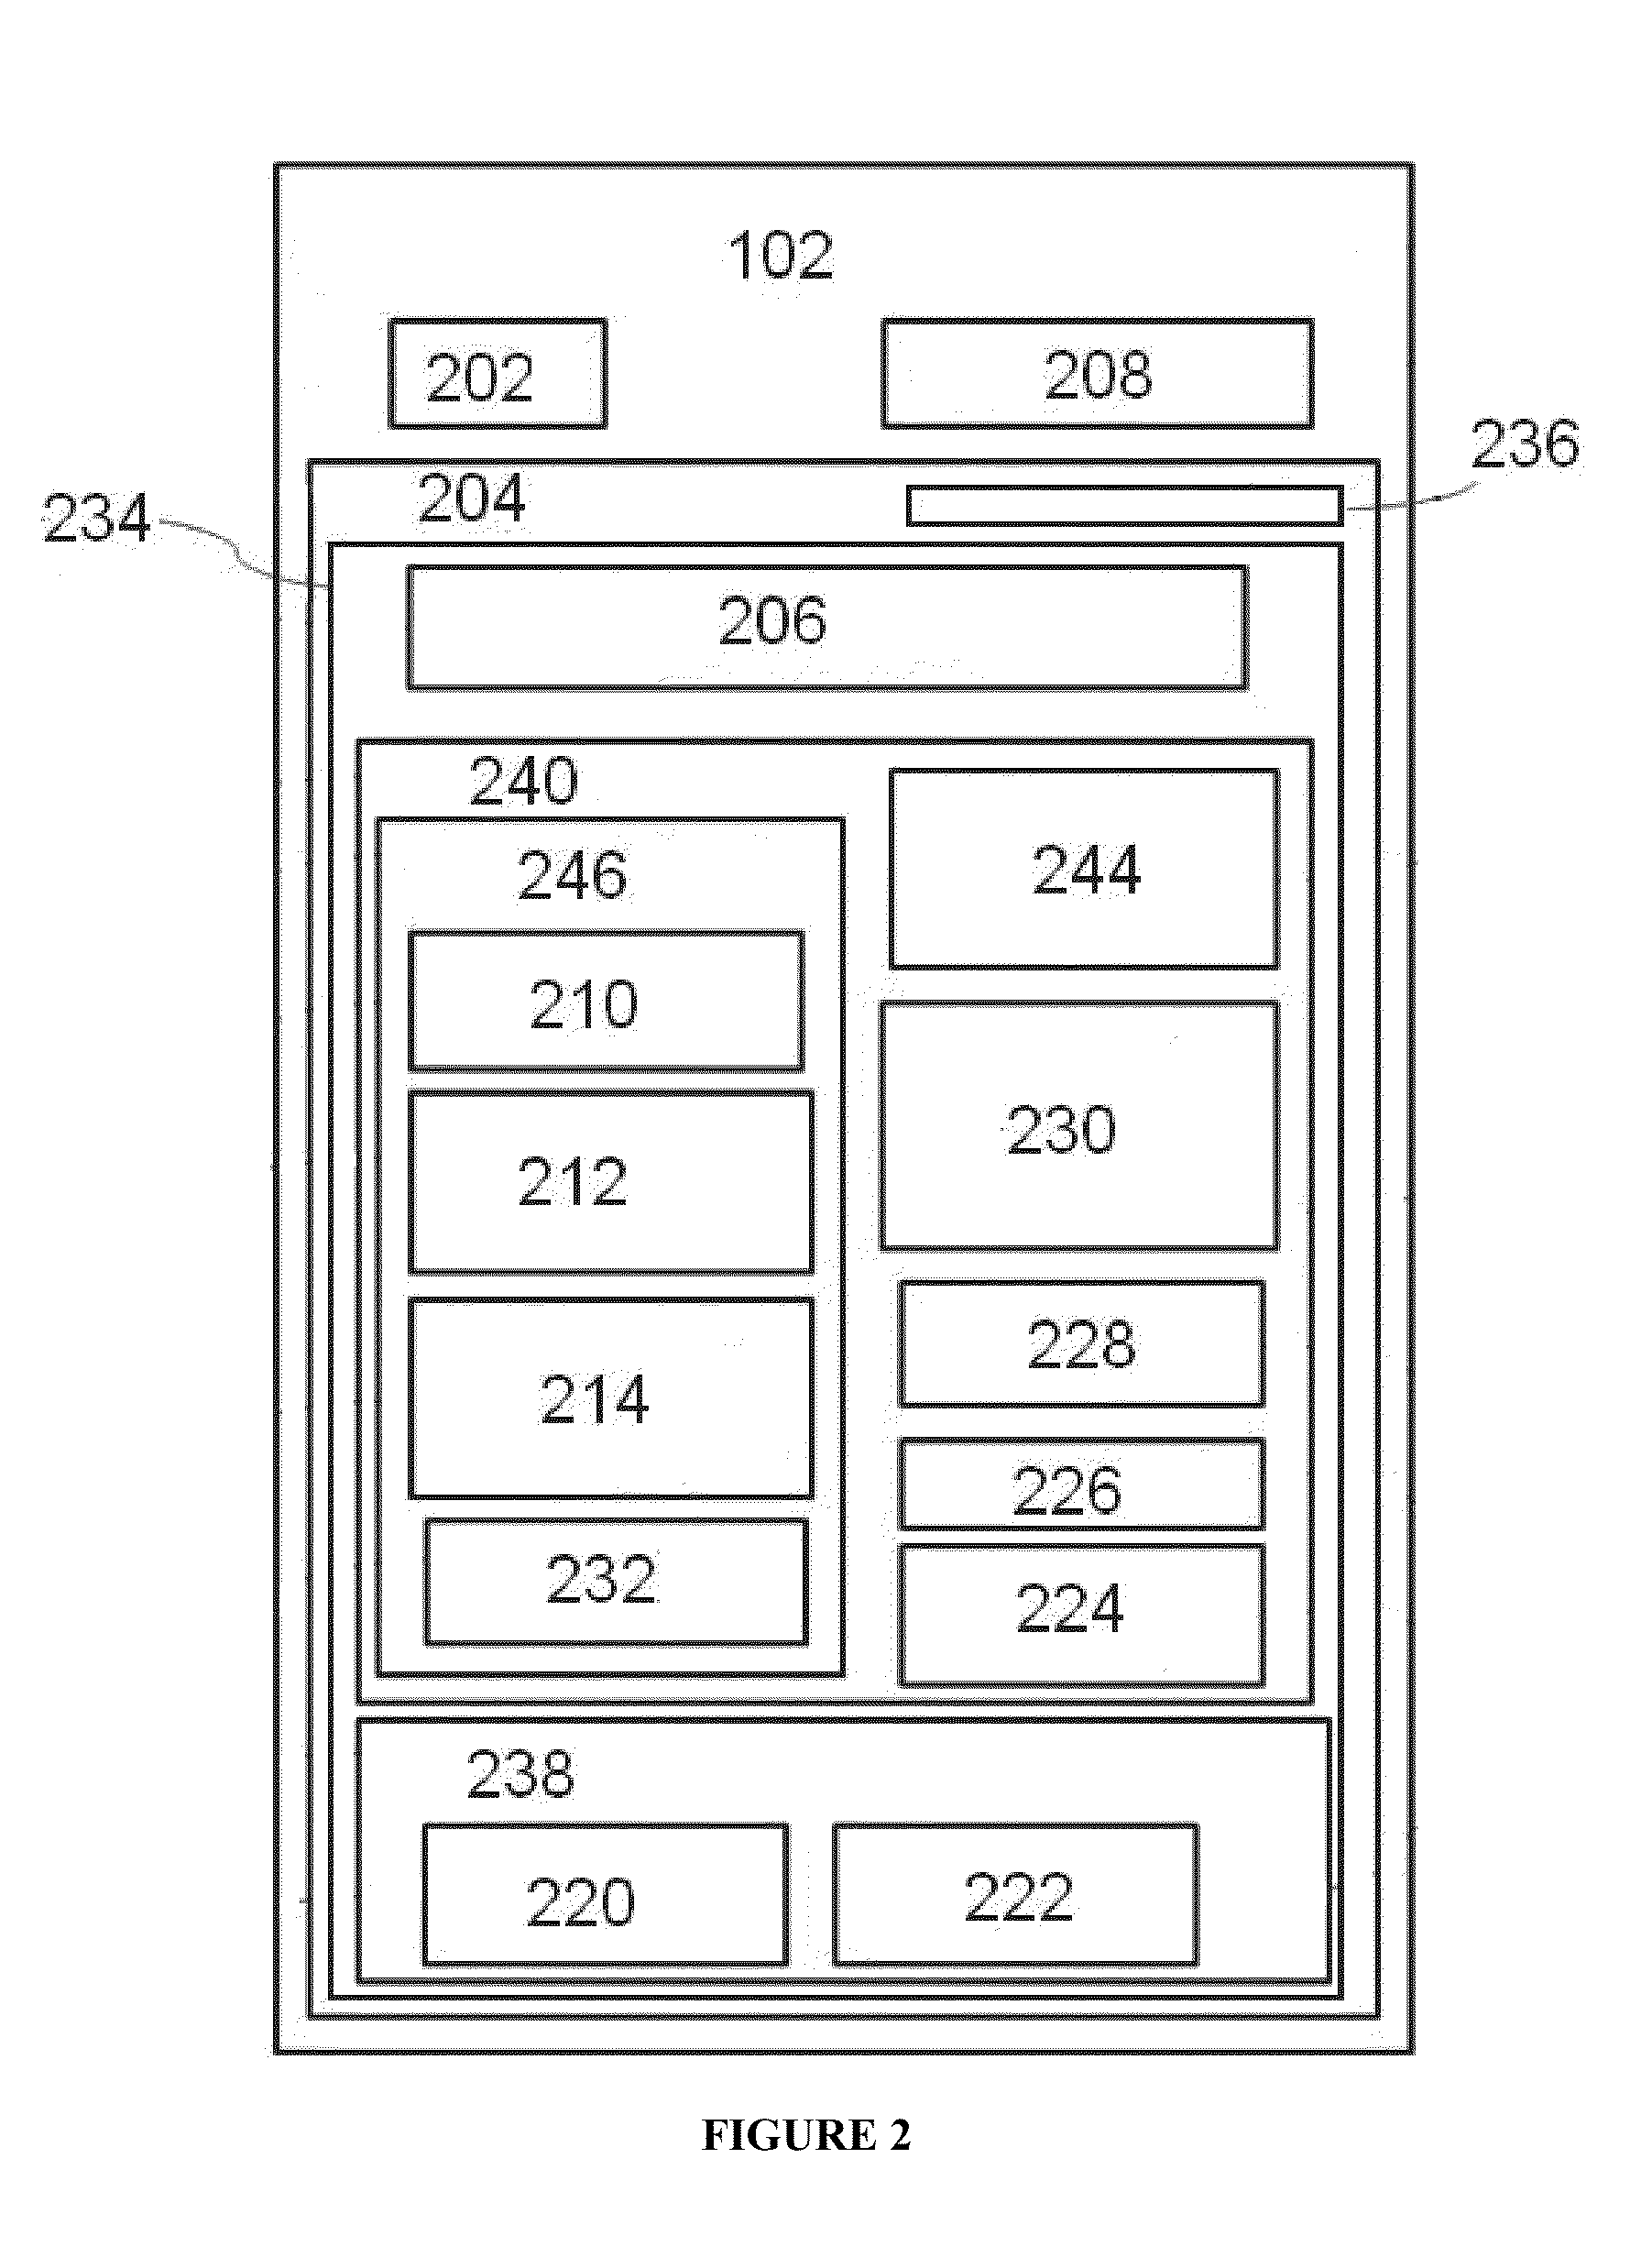 Dynamic multi-dimensional and multi-view pricing system